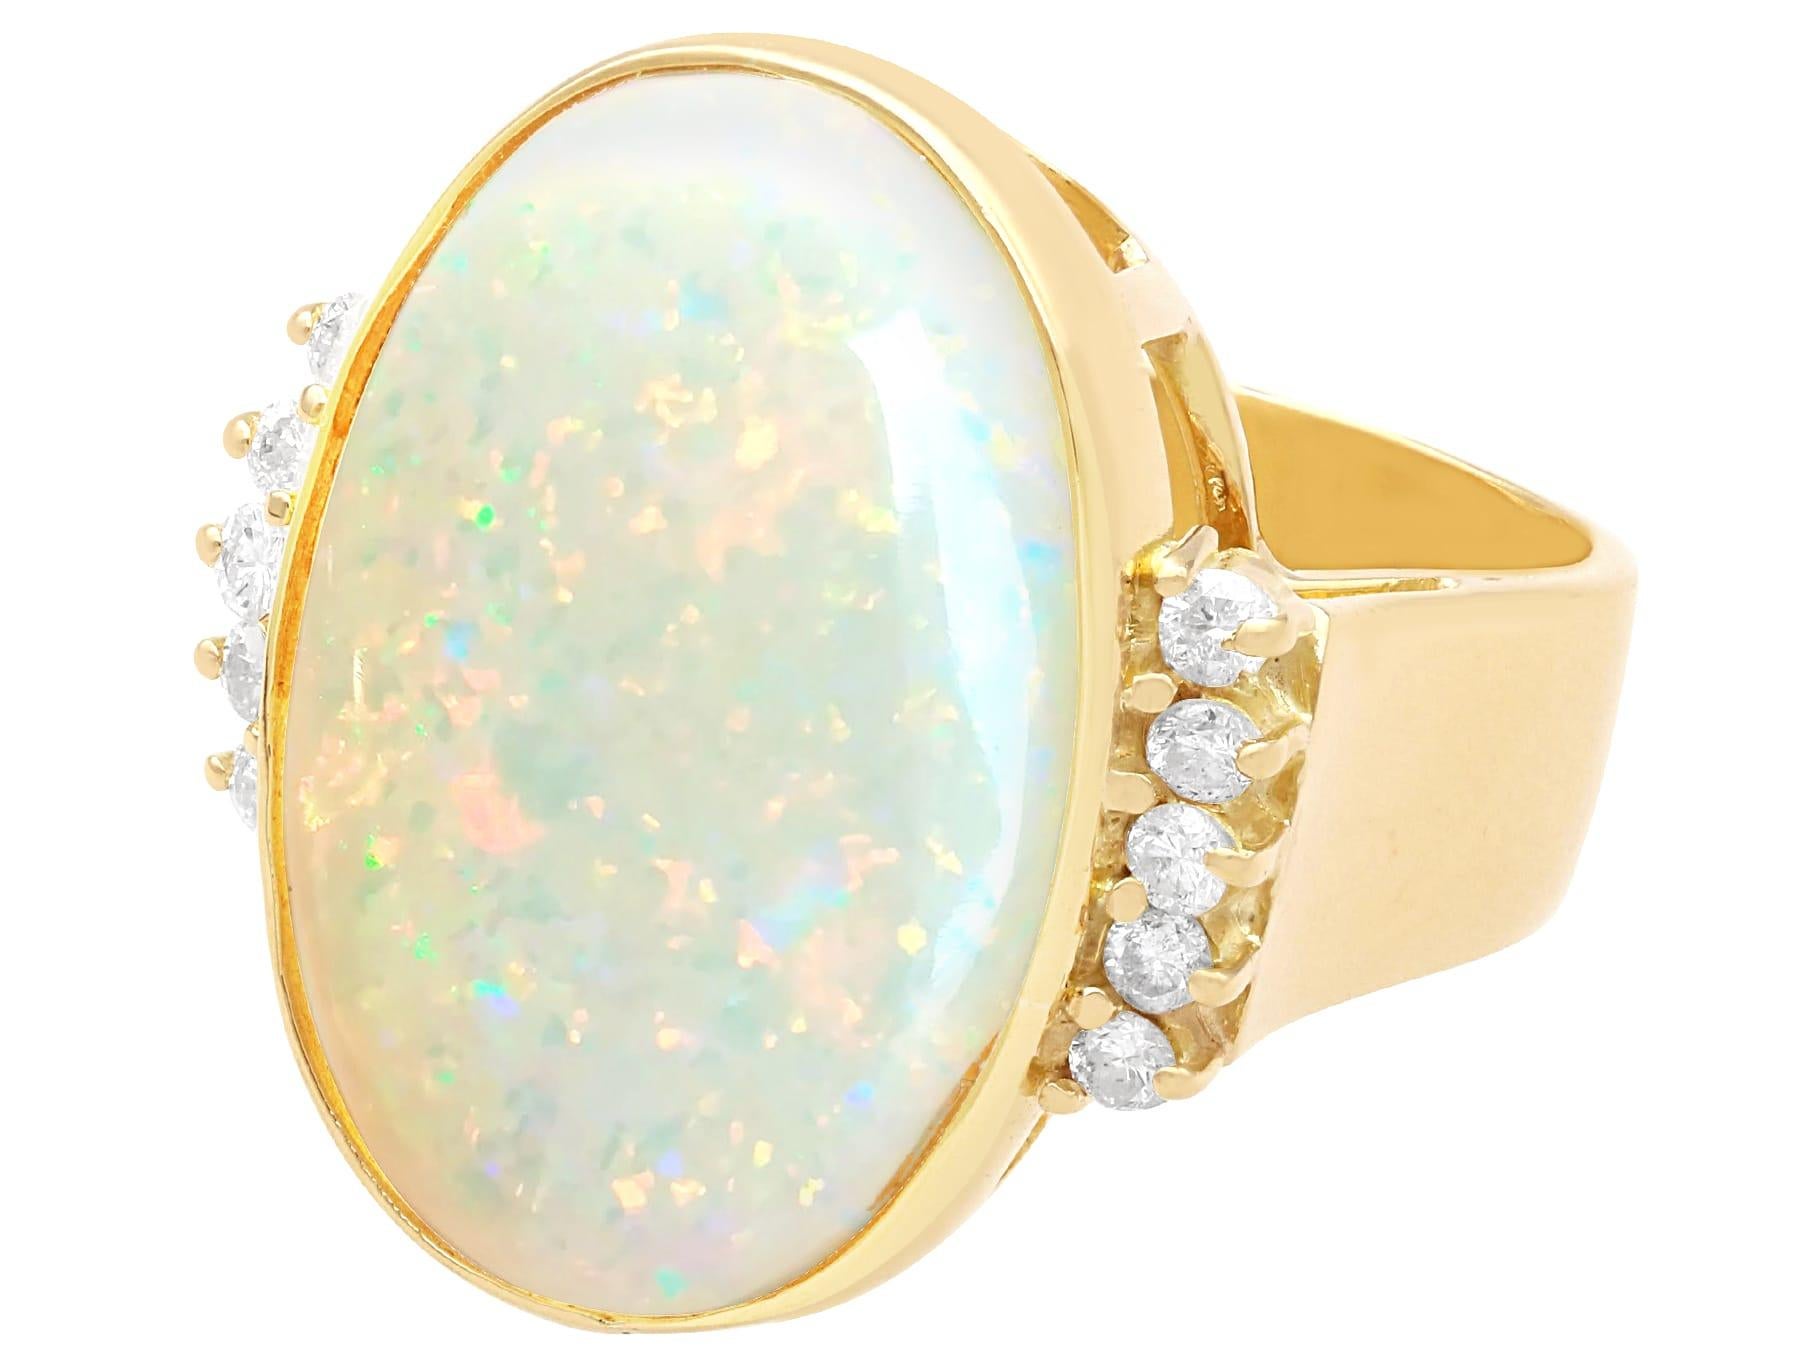 Cabochon Vintage 8.72 Carat Opal and 0.28 Carat Diamond, 18K Yellow Gold Dress Ring For Sale